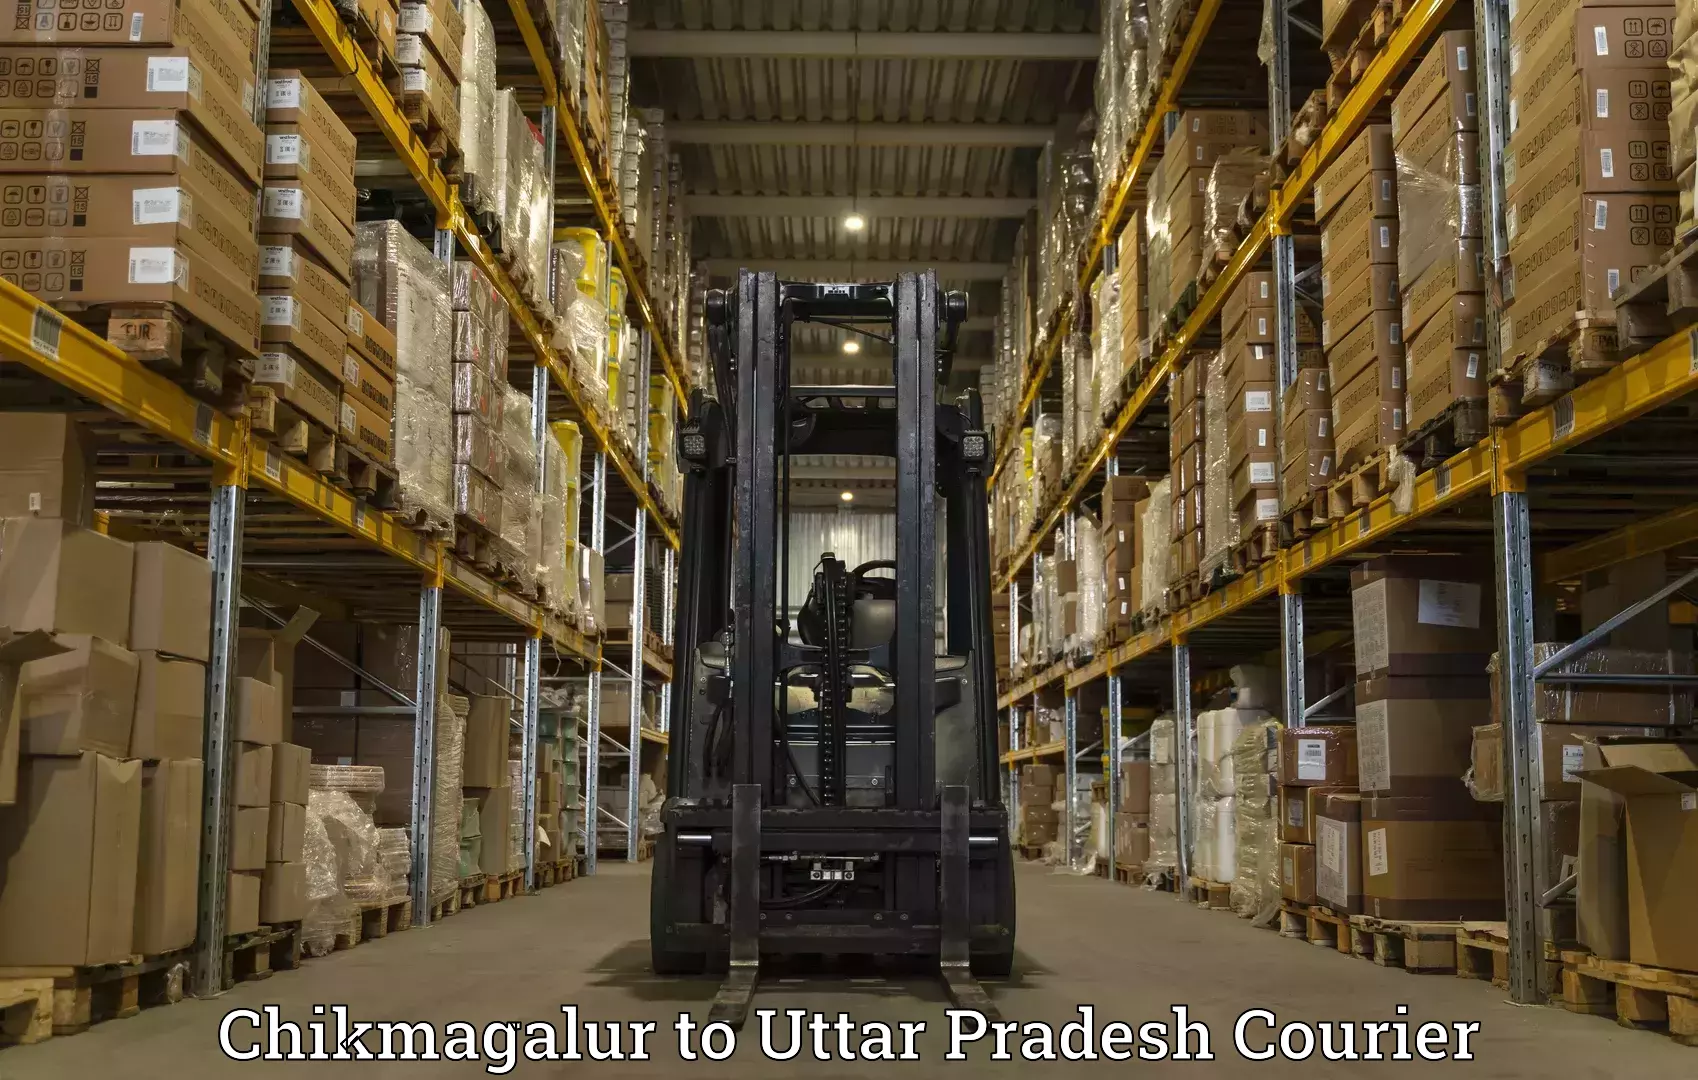 High-priority parcel service Chikmagalur to Afzalgarh